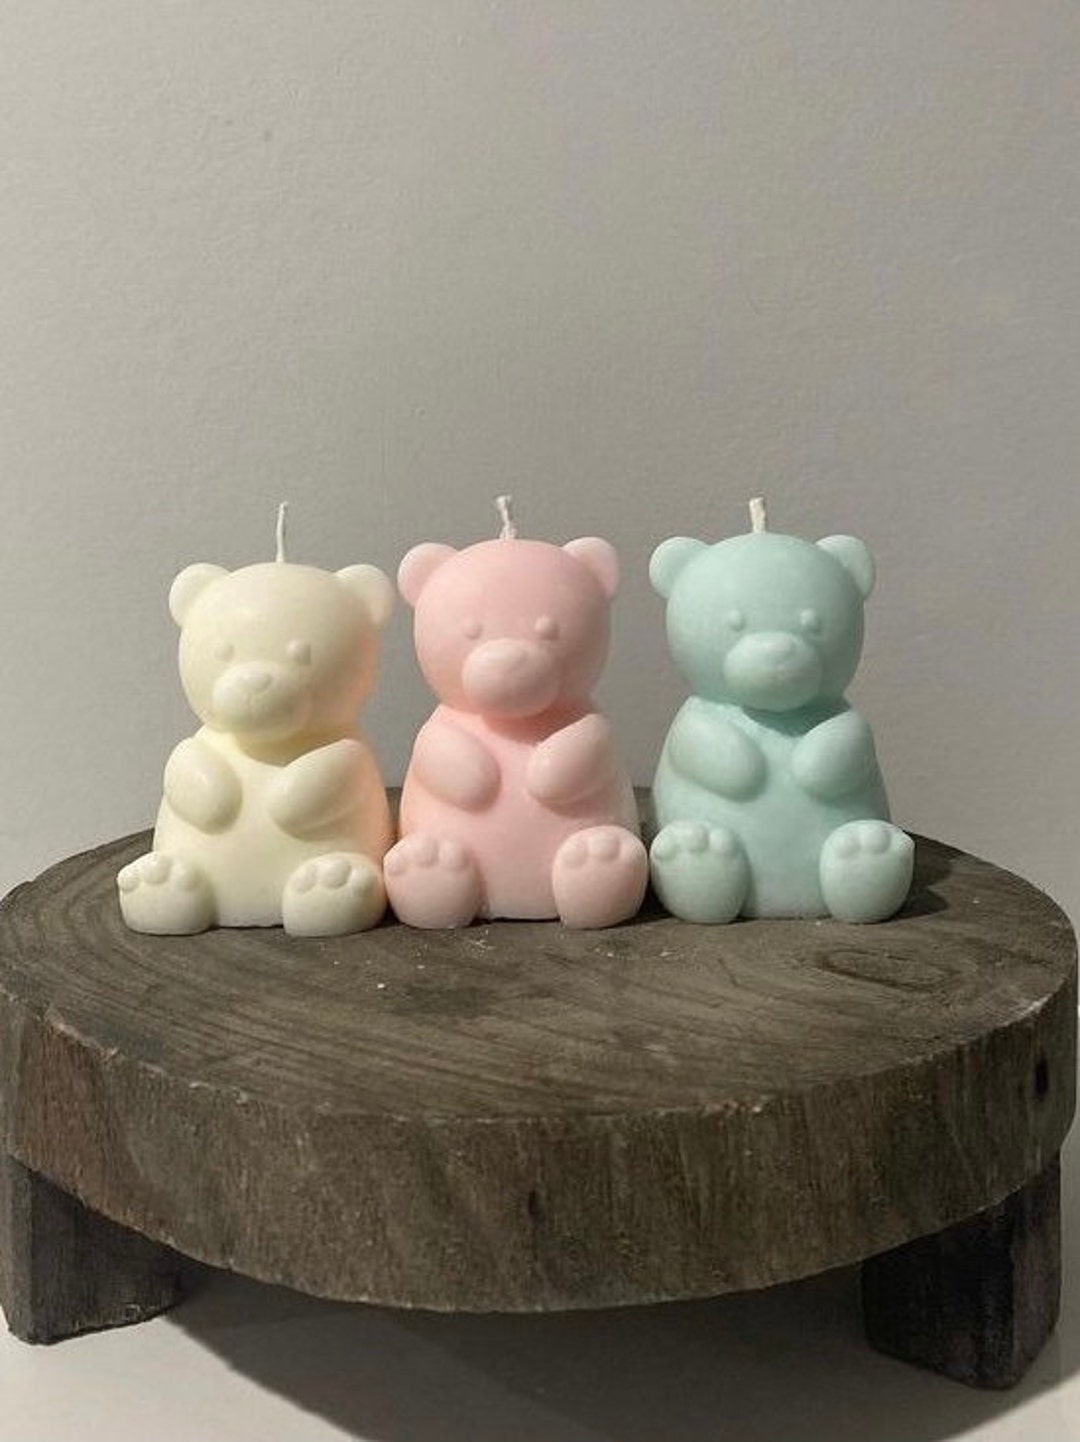 Teddy Bear Candle, 11 Oz, Royal Teddy Bear Candle, Vegan Soy Wax Candle,  Gift for Mom, Baby Shower Gift, Christmas Gift, Housewarming Gift 